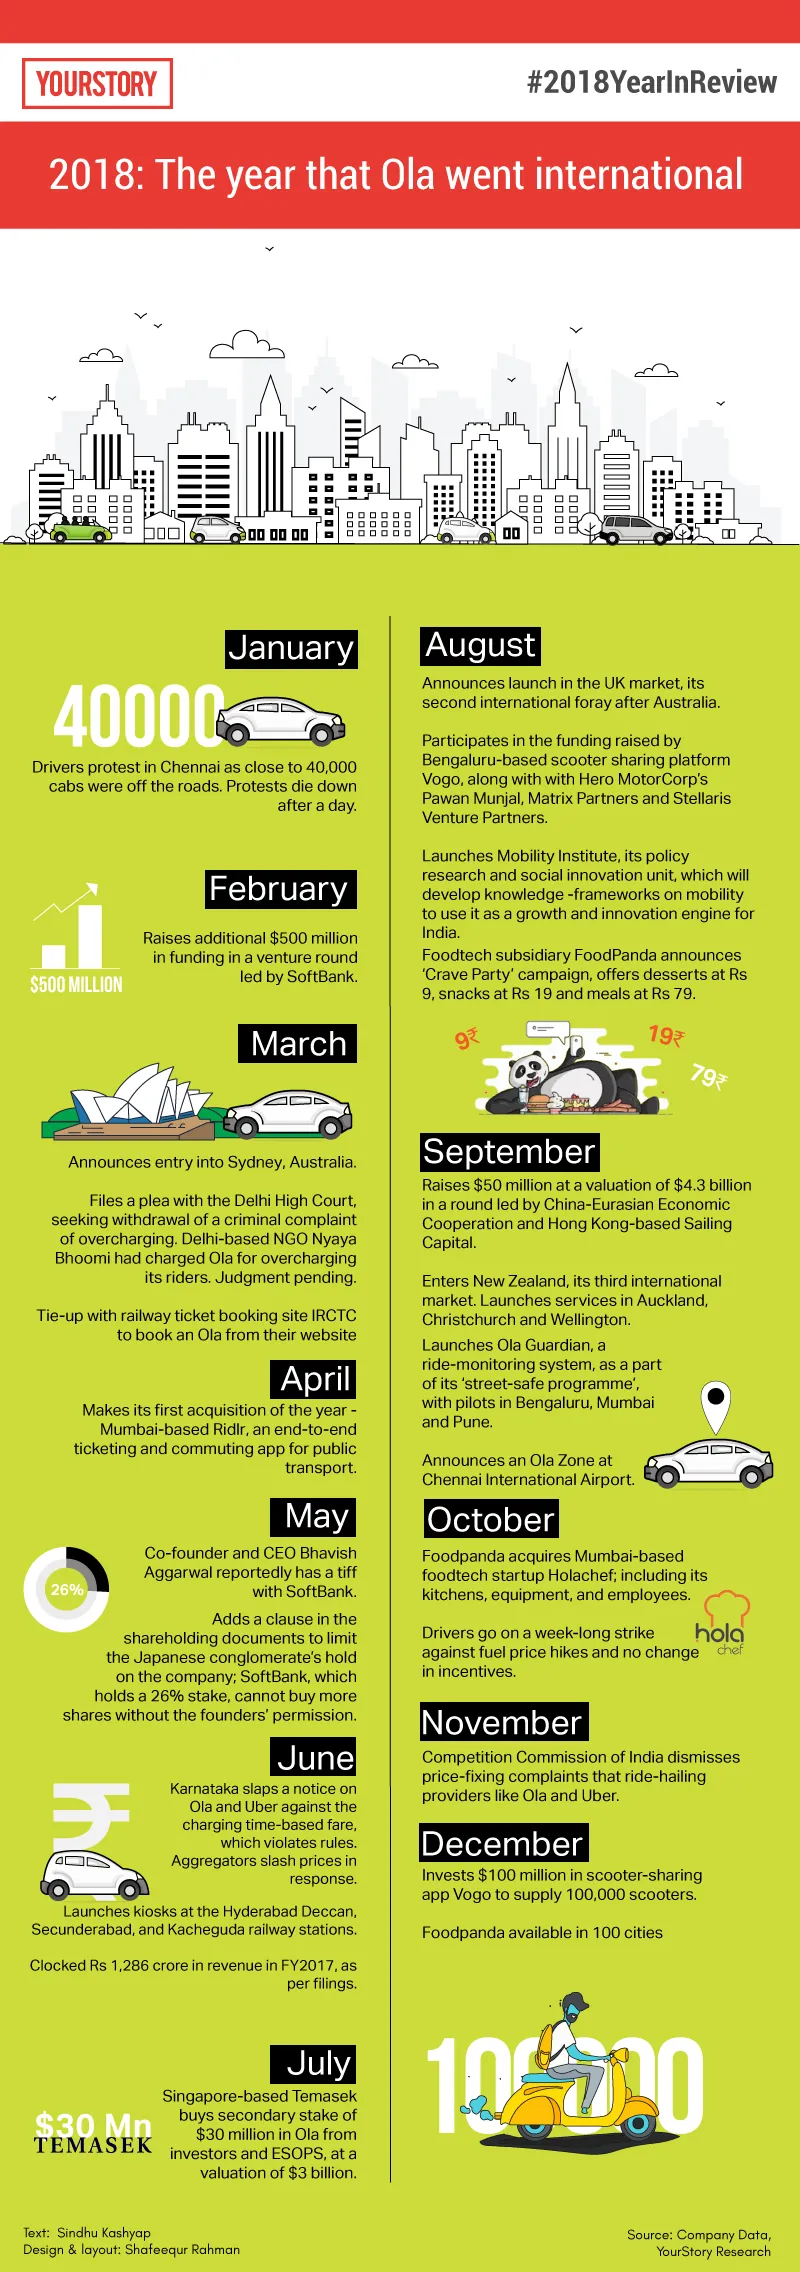 Ola, timeline, infographic, 2018, yourstory.com